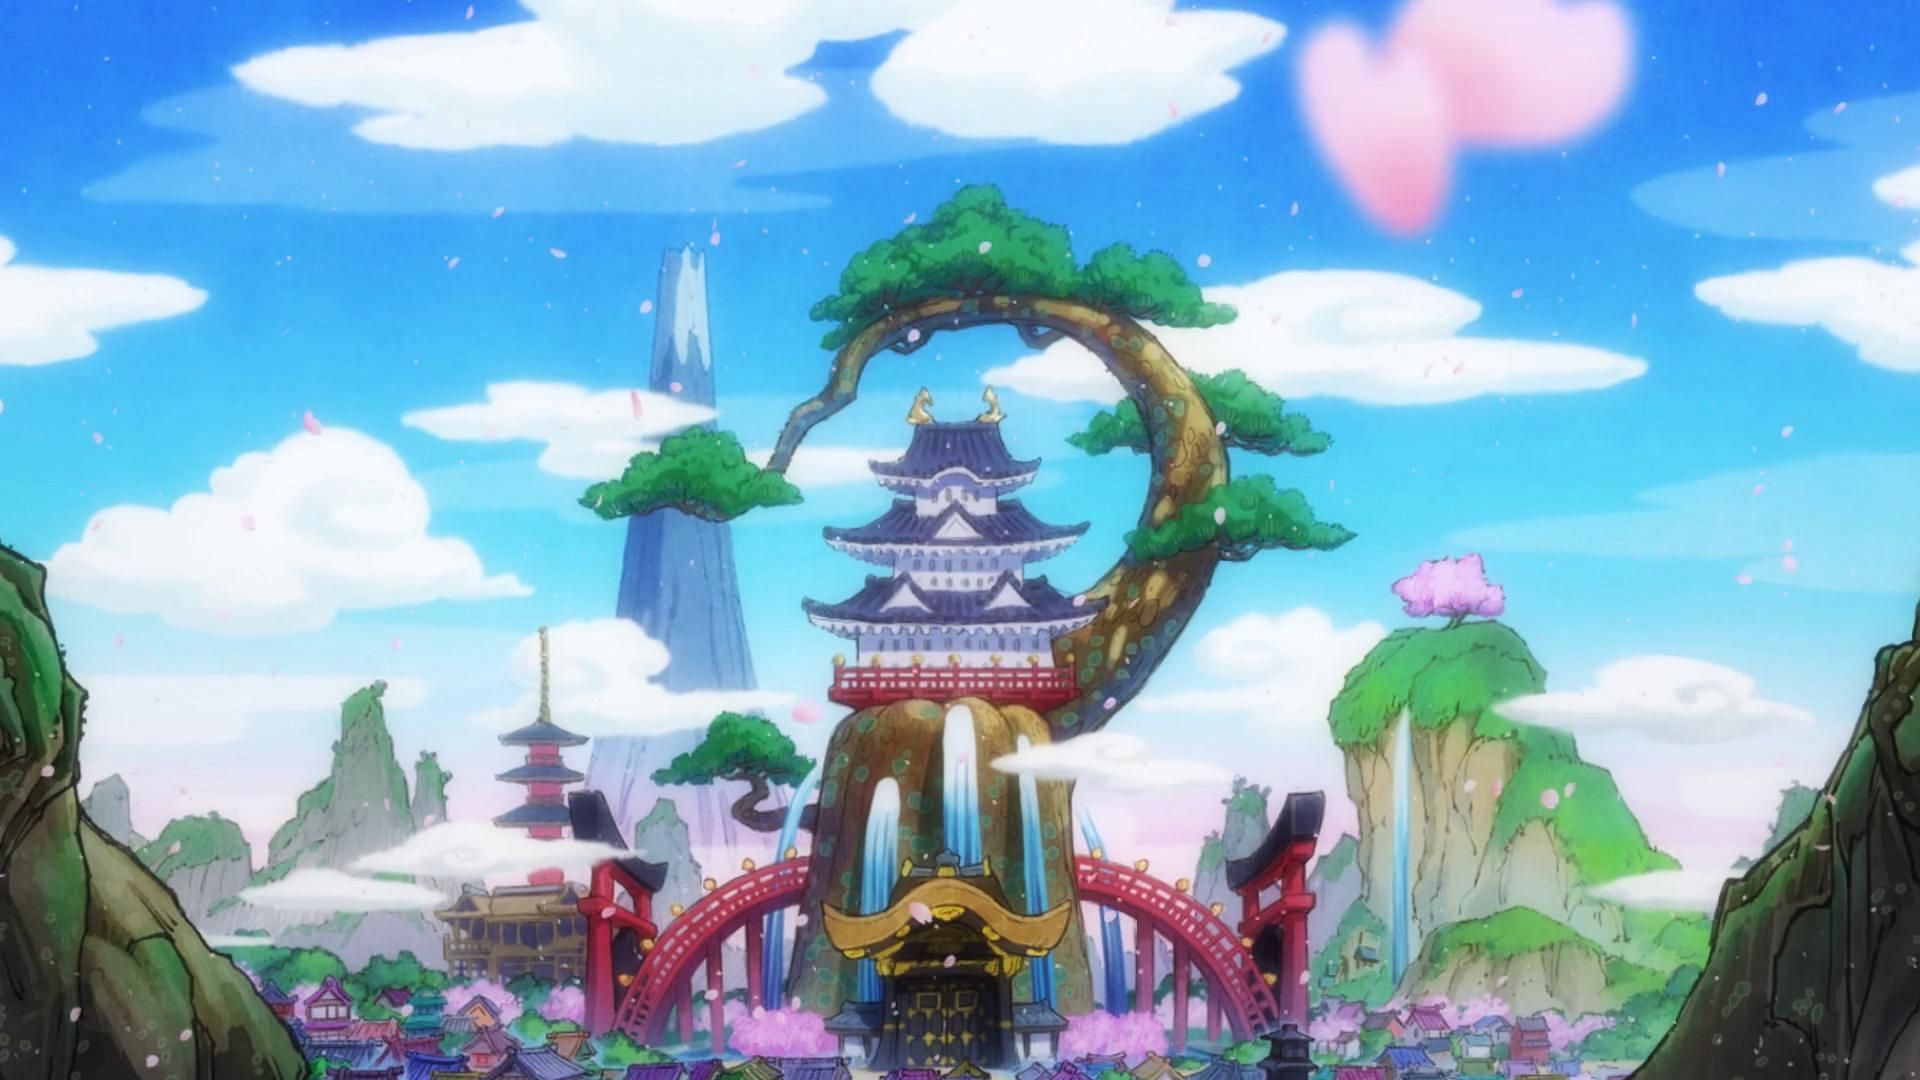 Wano&#039;s Flower Capital as seen in the One Piece anime (Image via Toei Animation)